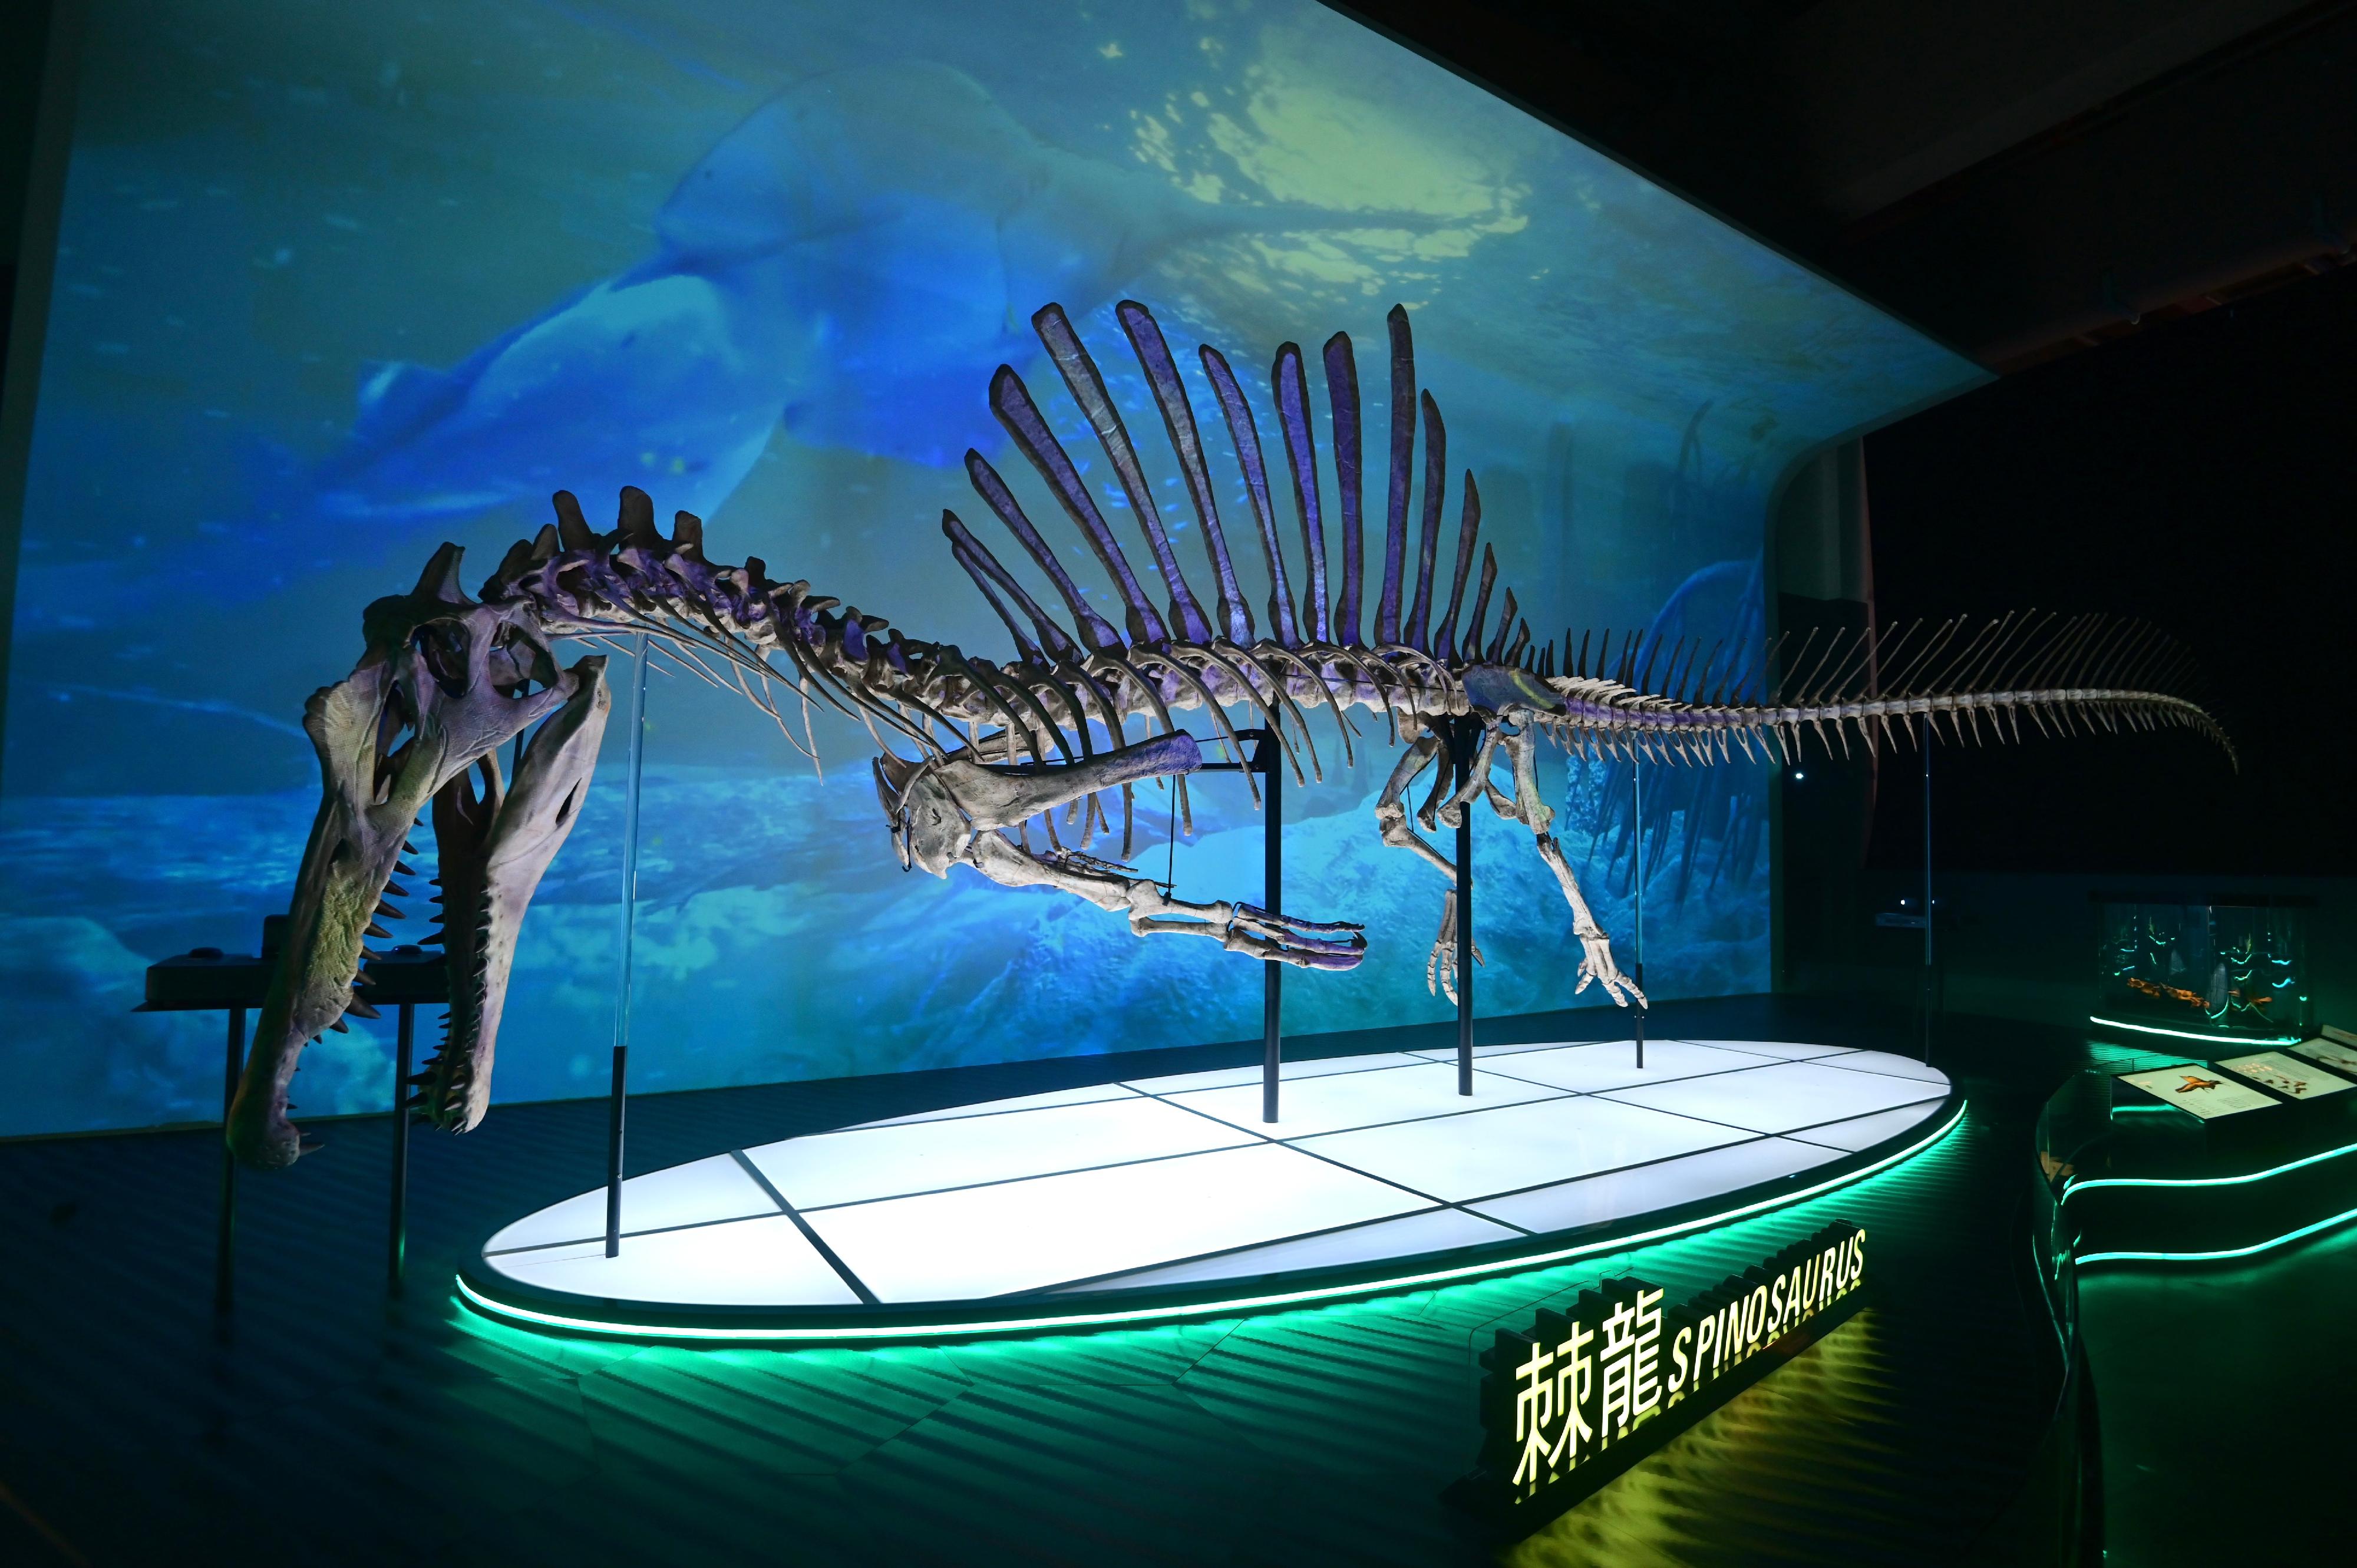 The Hong Kong Science Museum will stage a large-scale dinosaur exhibition, "The Hong Kong Jockey Club Series: The Big Eight - Dinosaur Revelation", from July 8 (Friday). Picture shows a 1:1 reconstructed skeleton model of Spinosaurus, as if it is swimming in water with a light projection effect.